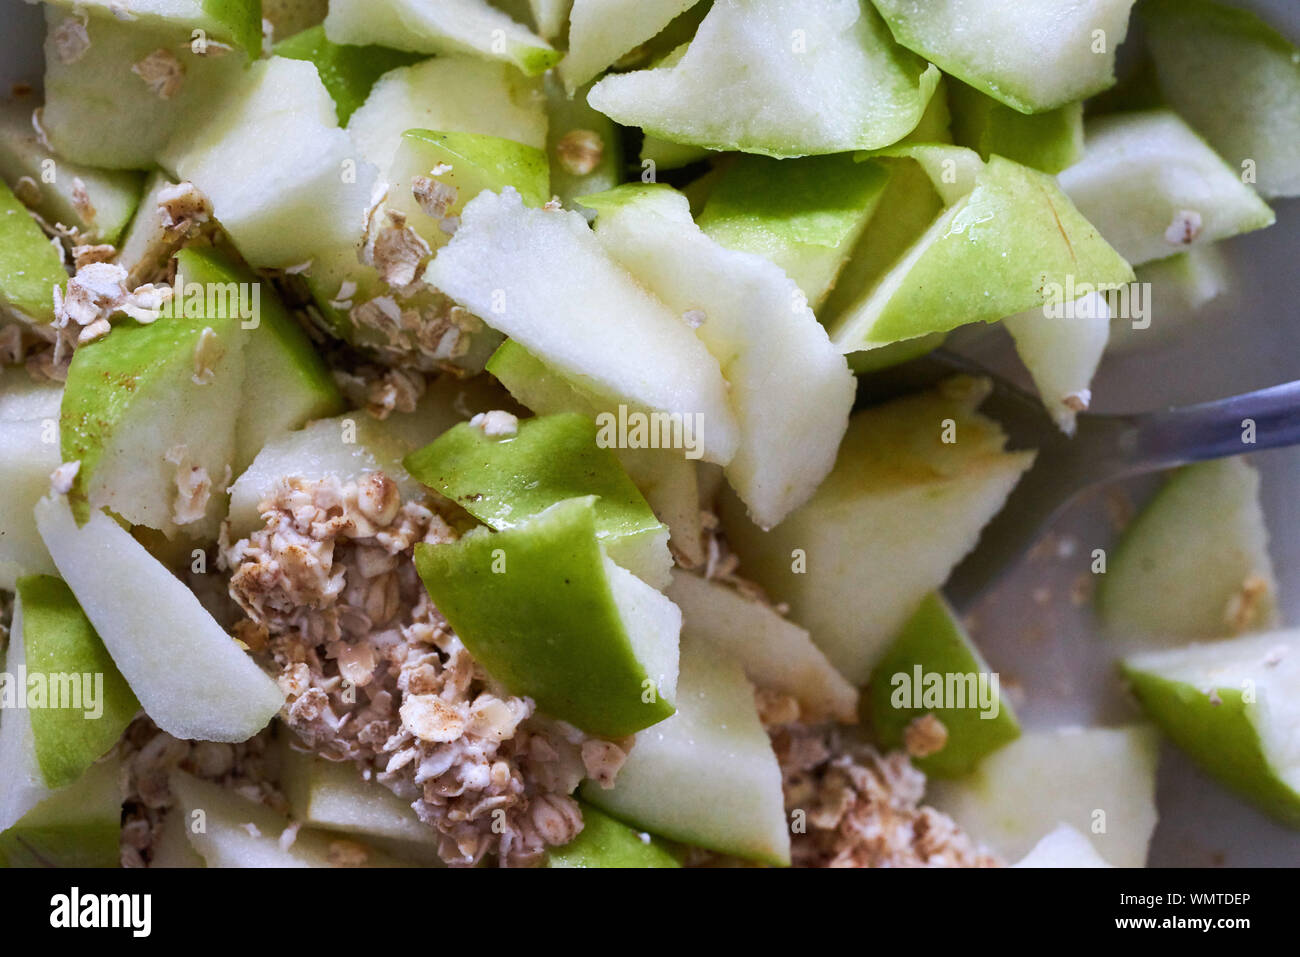 Full Frame Shot Of Breakfast Cereal With Chopped Apples Stock Photo